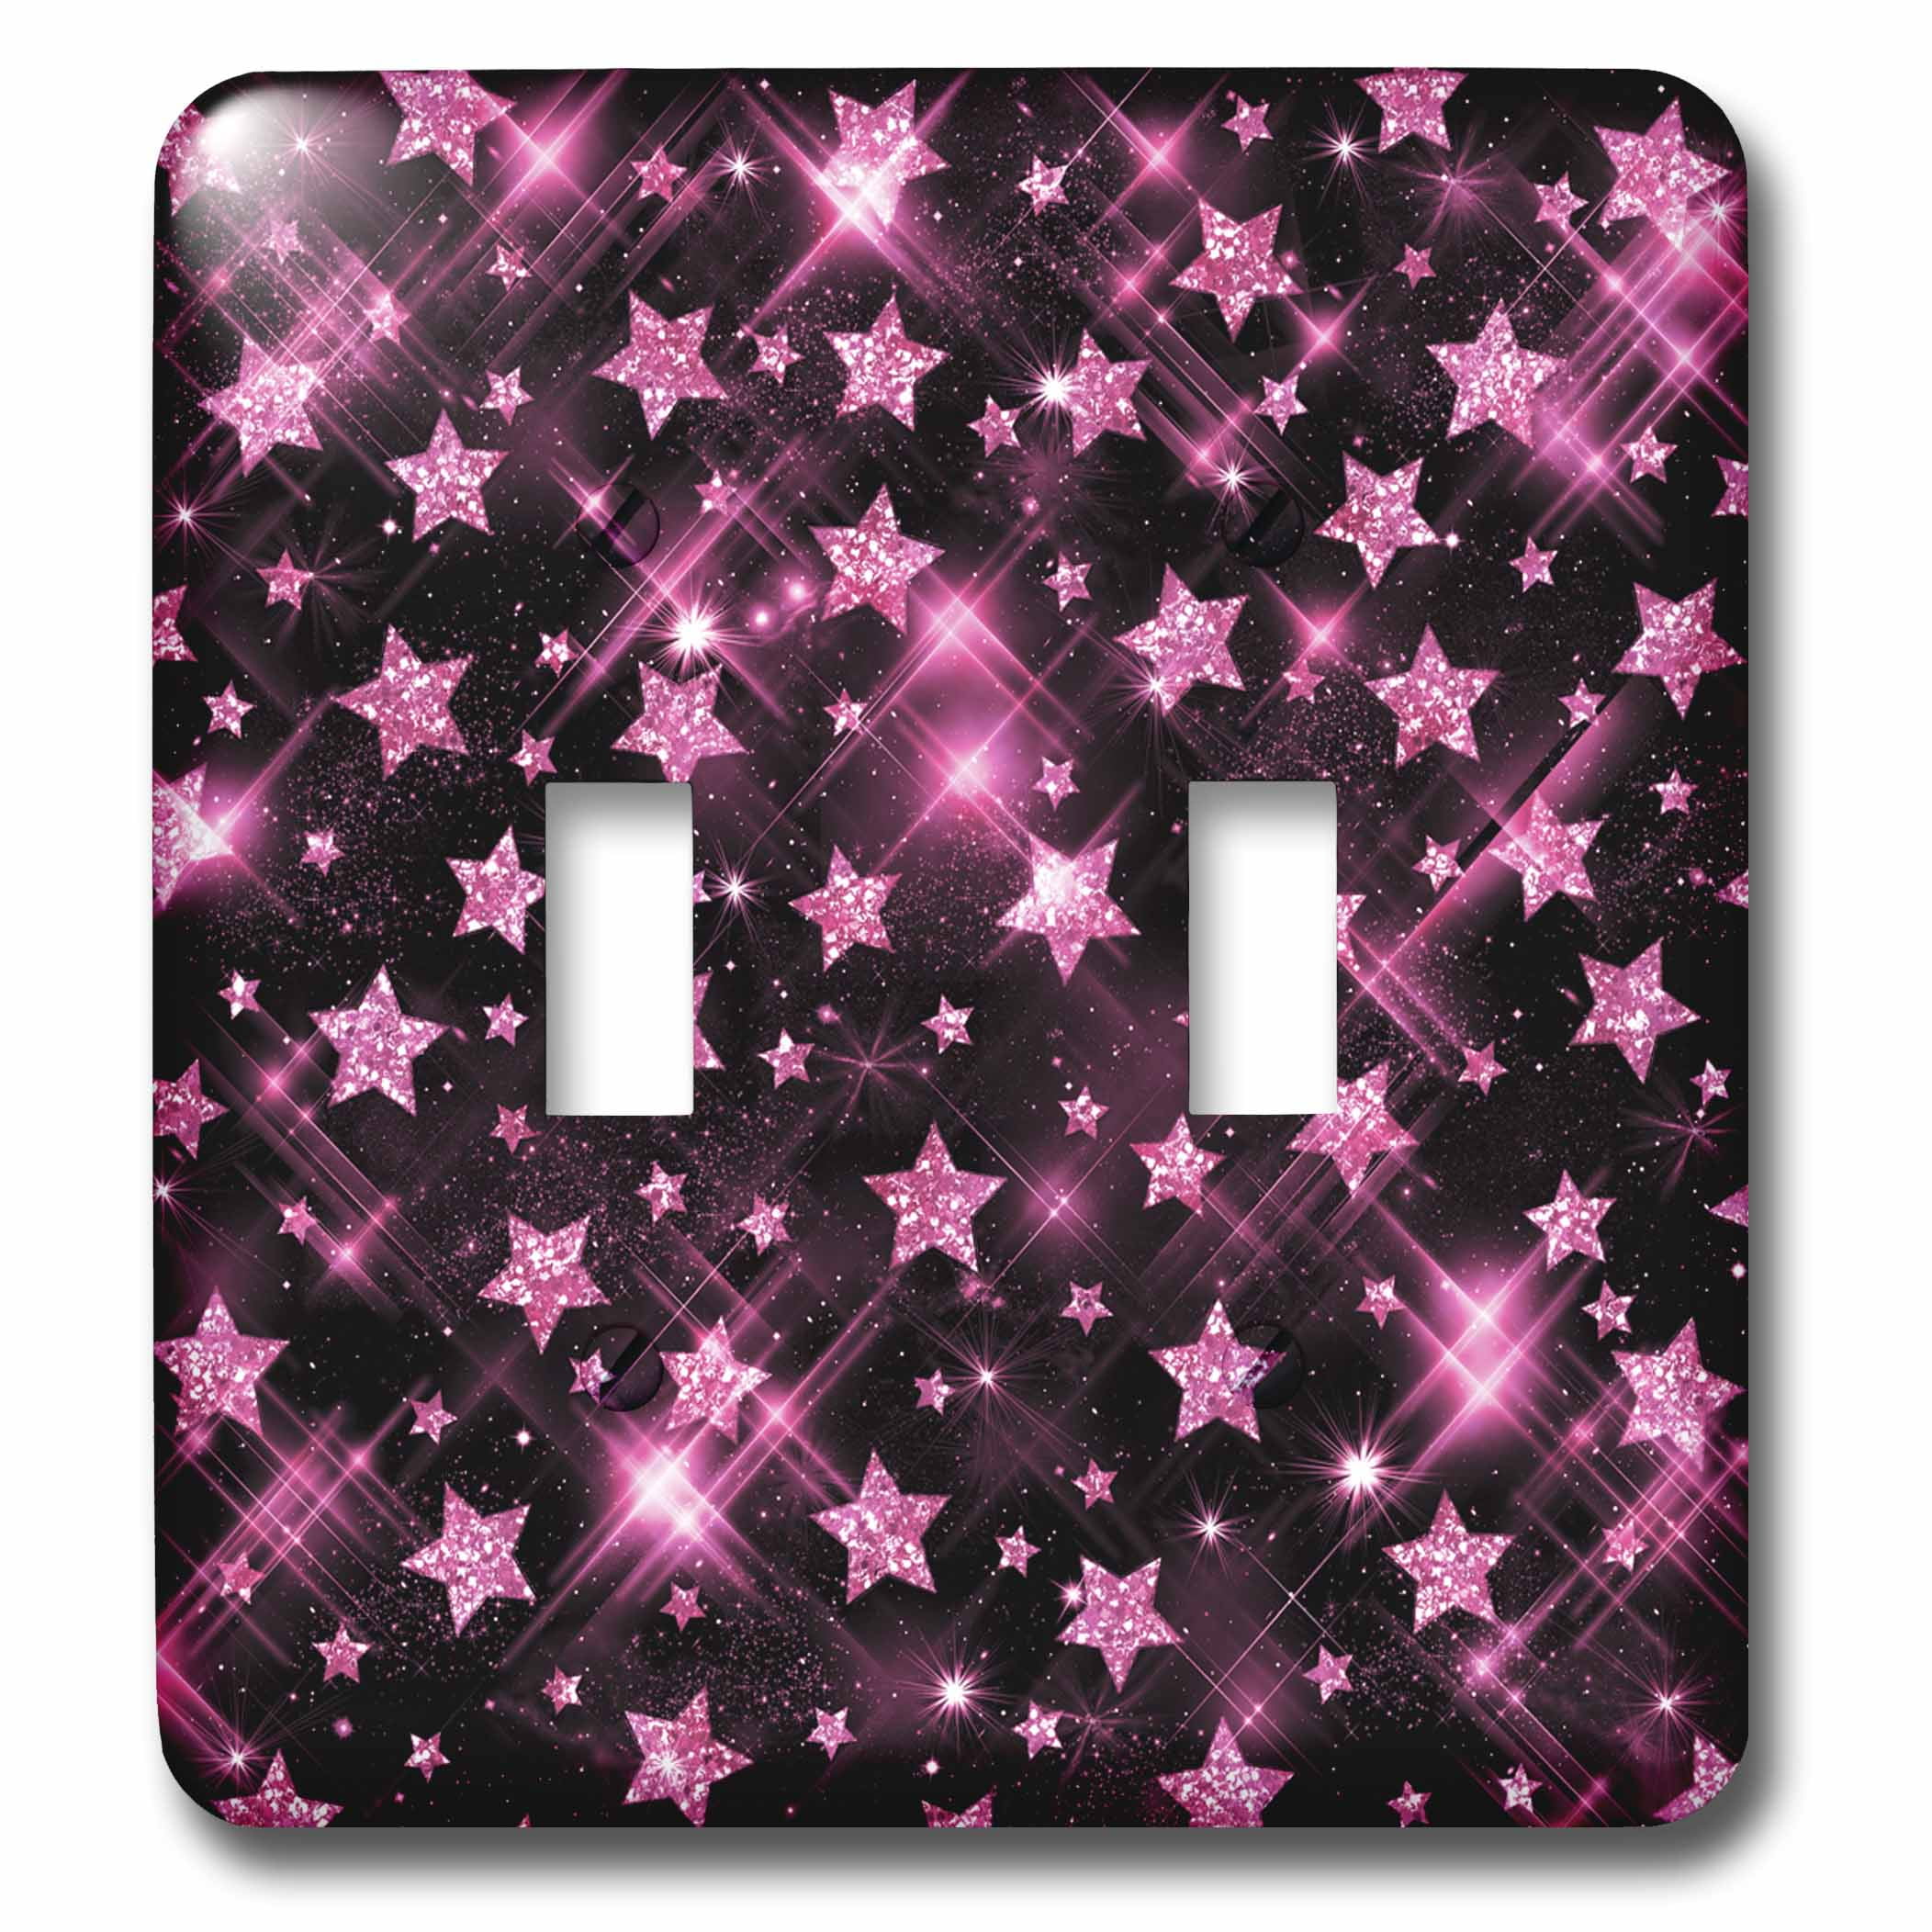 3dRose lsp_63064_2 Cosmic Dust Sparkles and Butterflies Double Toggle Switch